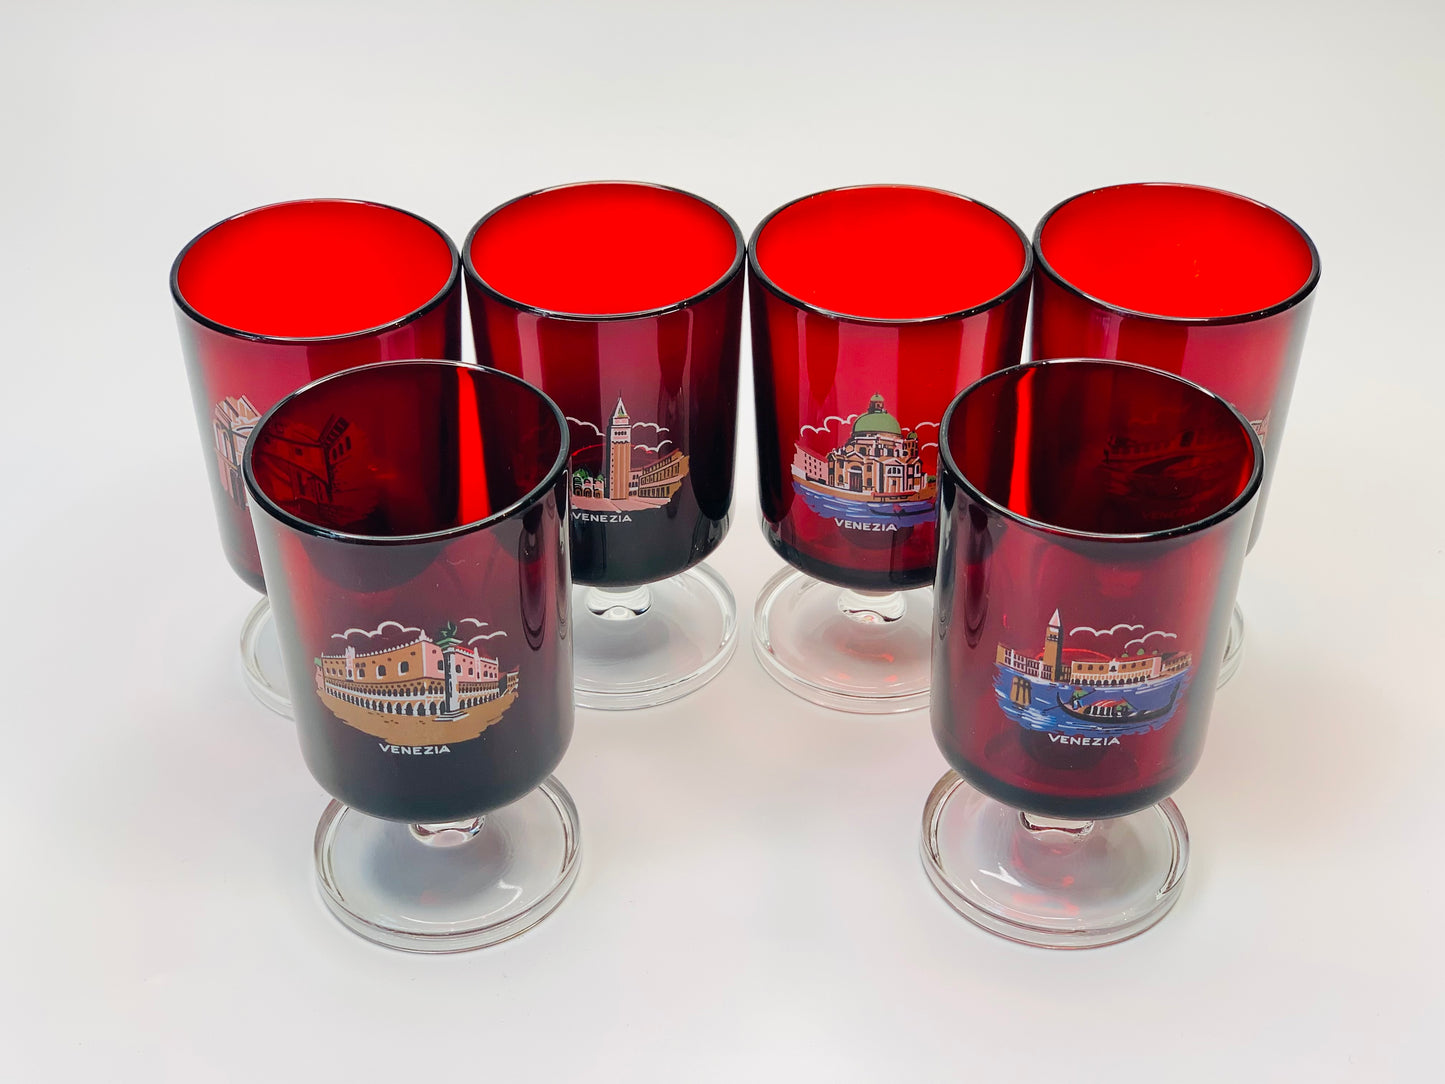 Ruby glass stemware depicting a different famous site of Venice on each glass